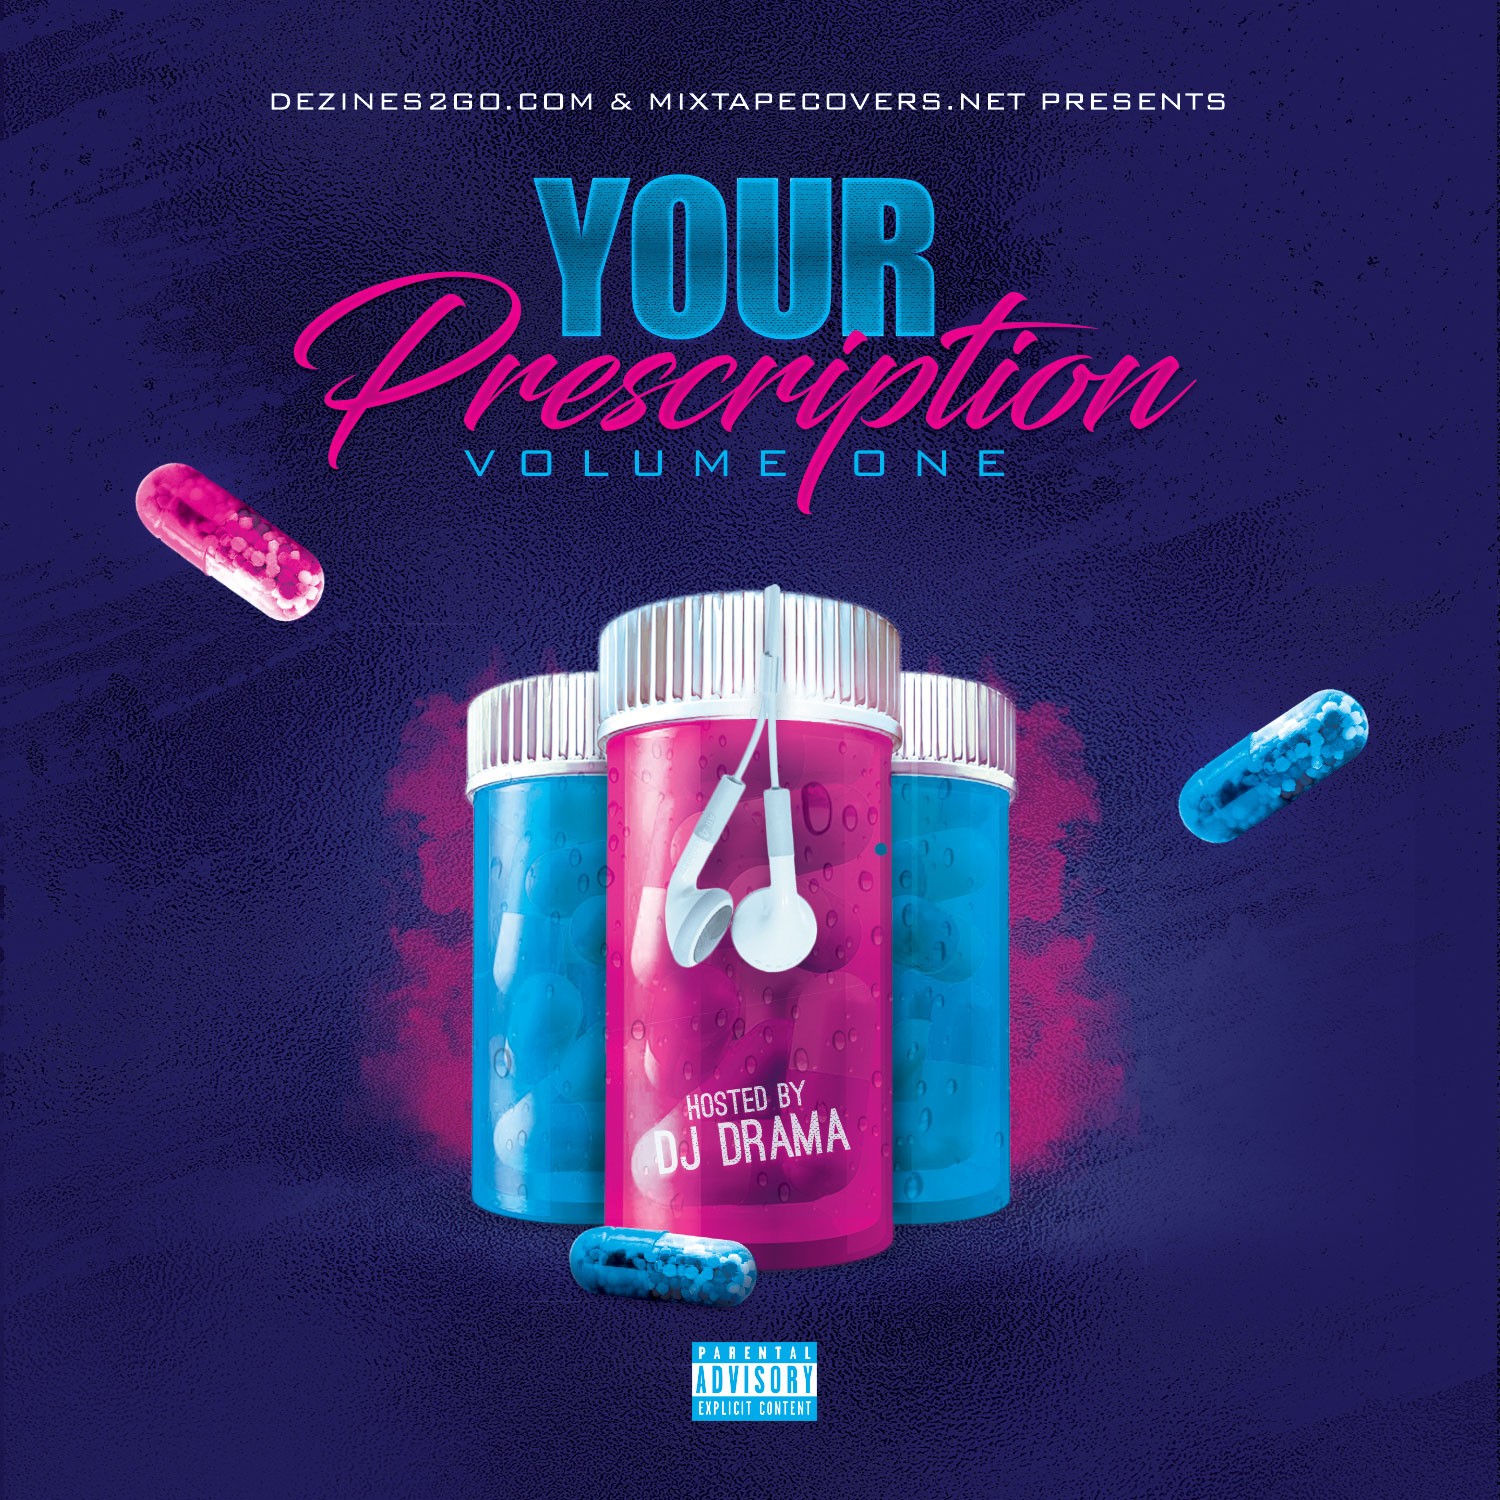 Your Rx Mixtape Cover Template MixtapeCovers Net